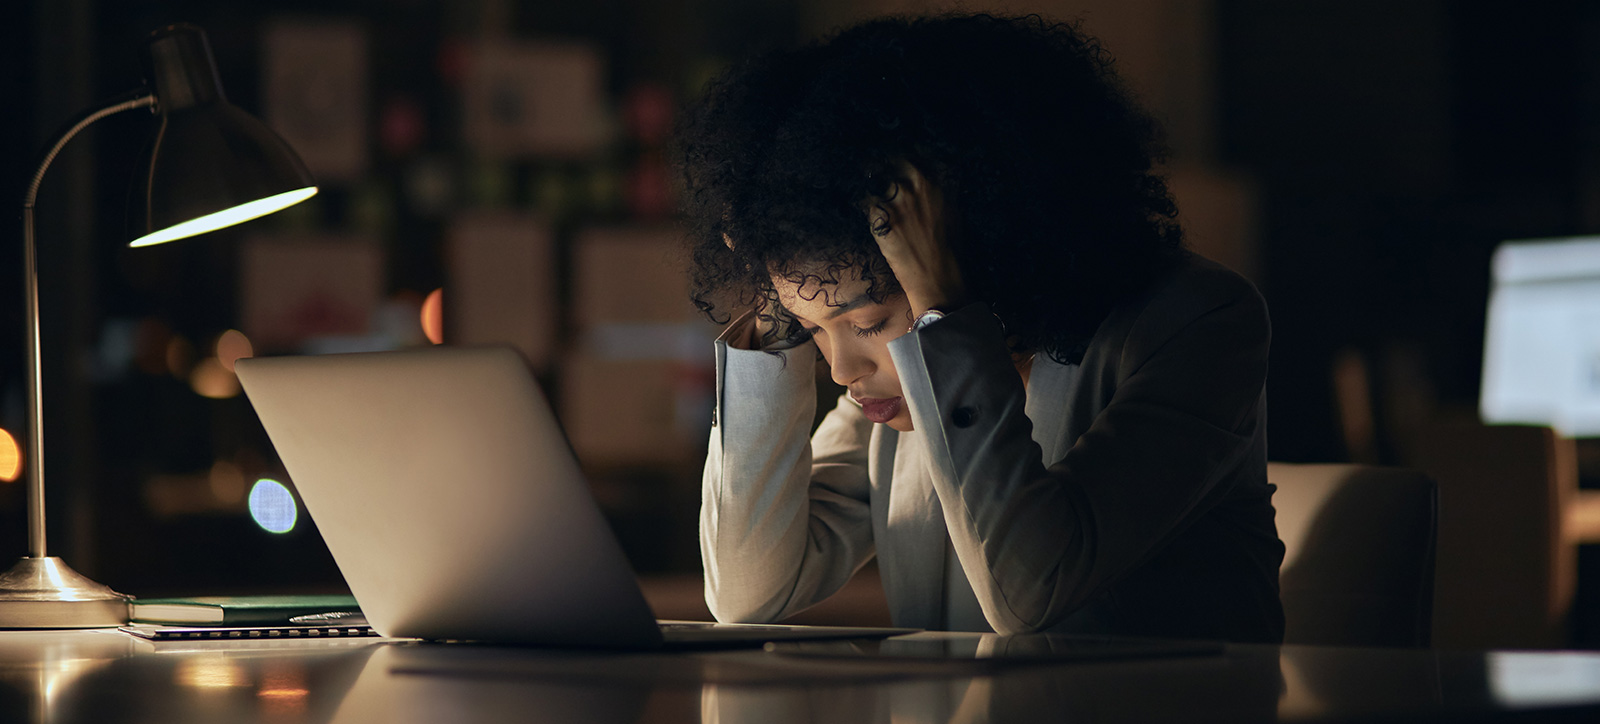 A stressed employee sits at her desk with her head in her hands while working late in a dark office.